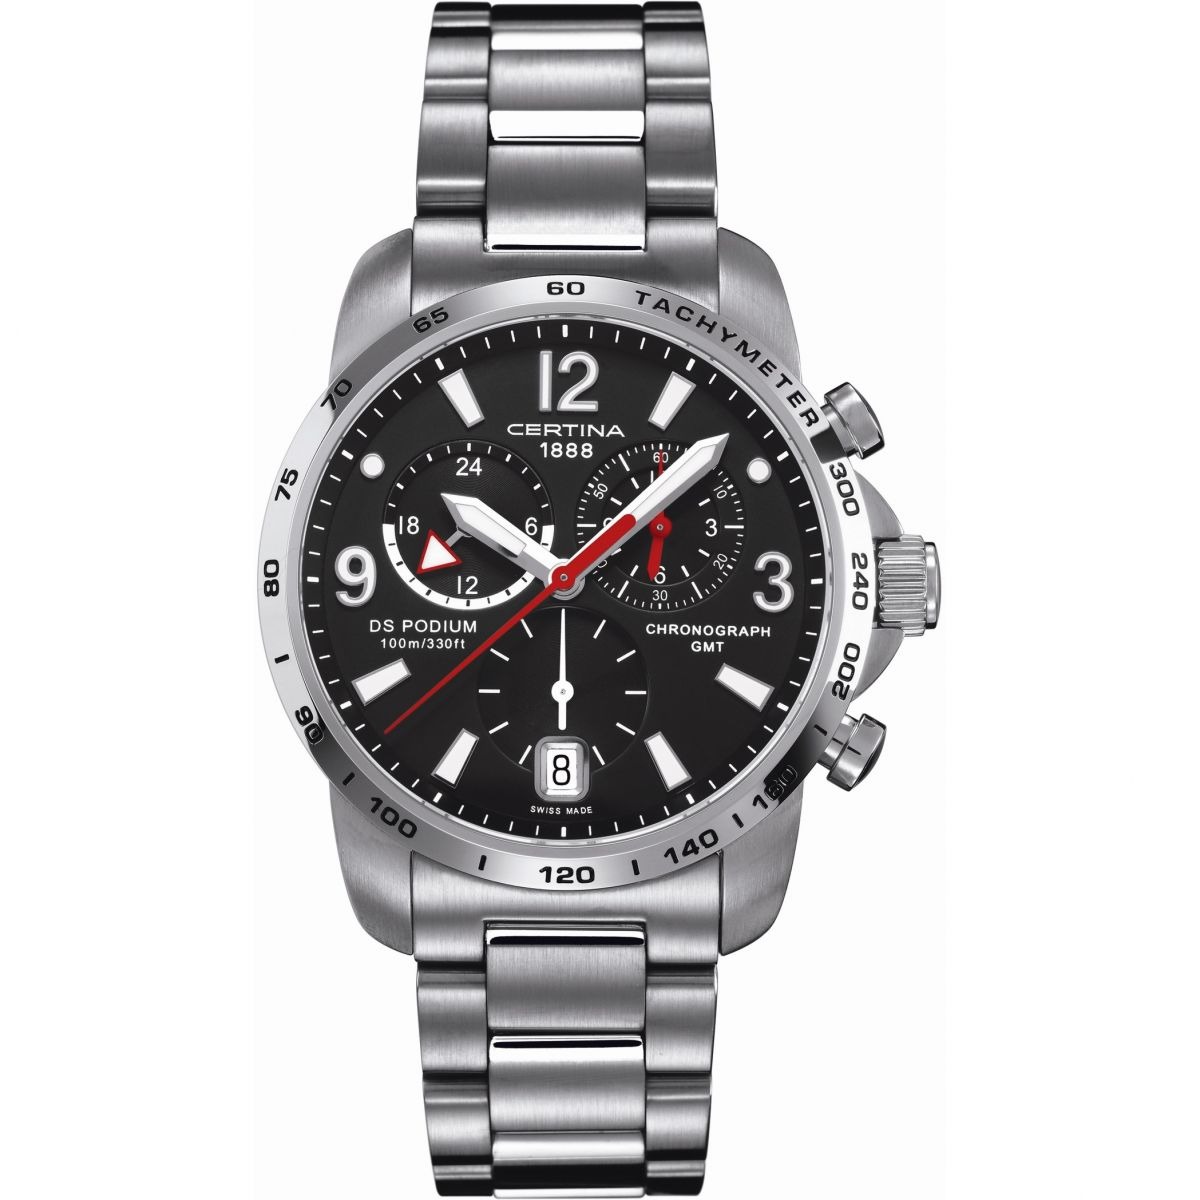 Certina - Black Chronograph Watch for Man from Watch Shop GOOFASH